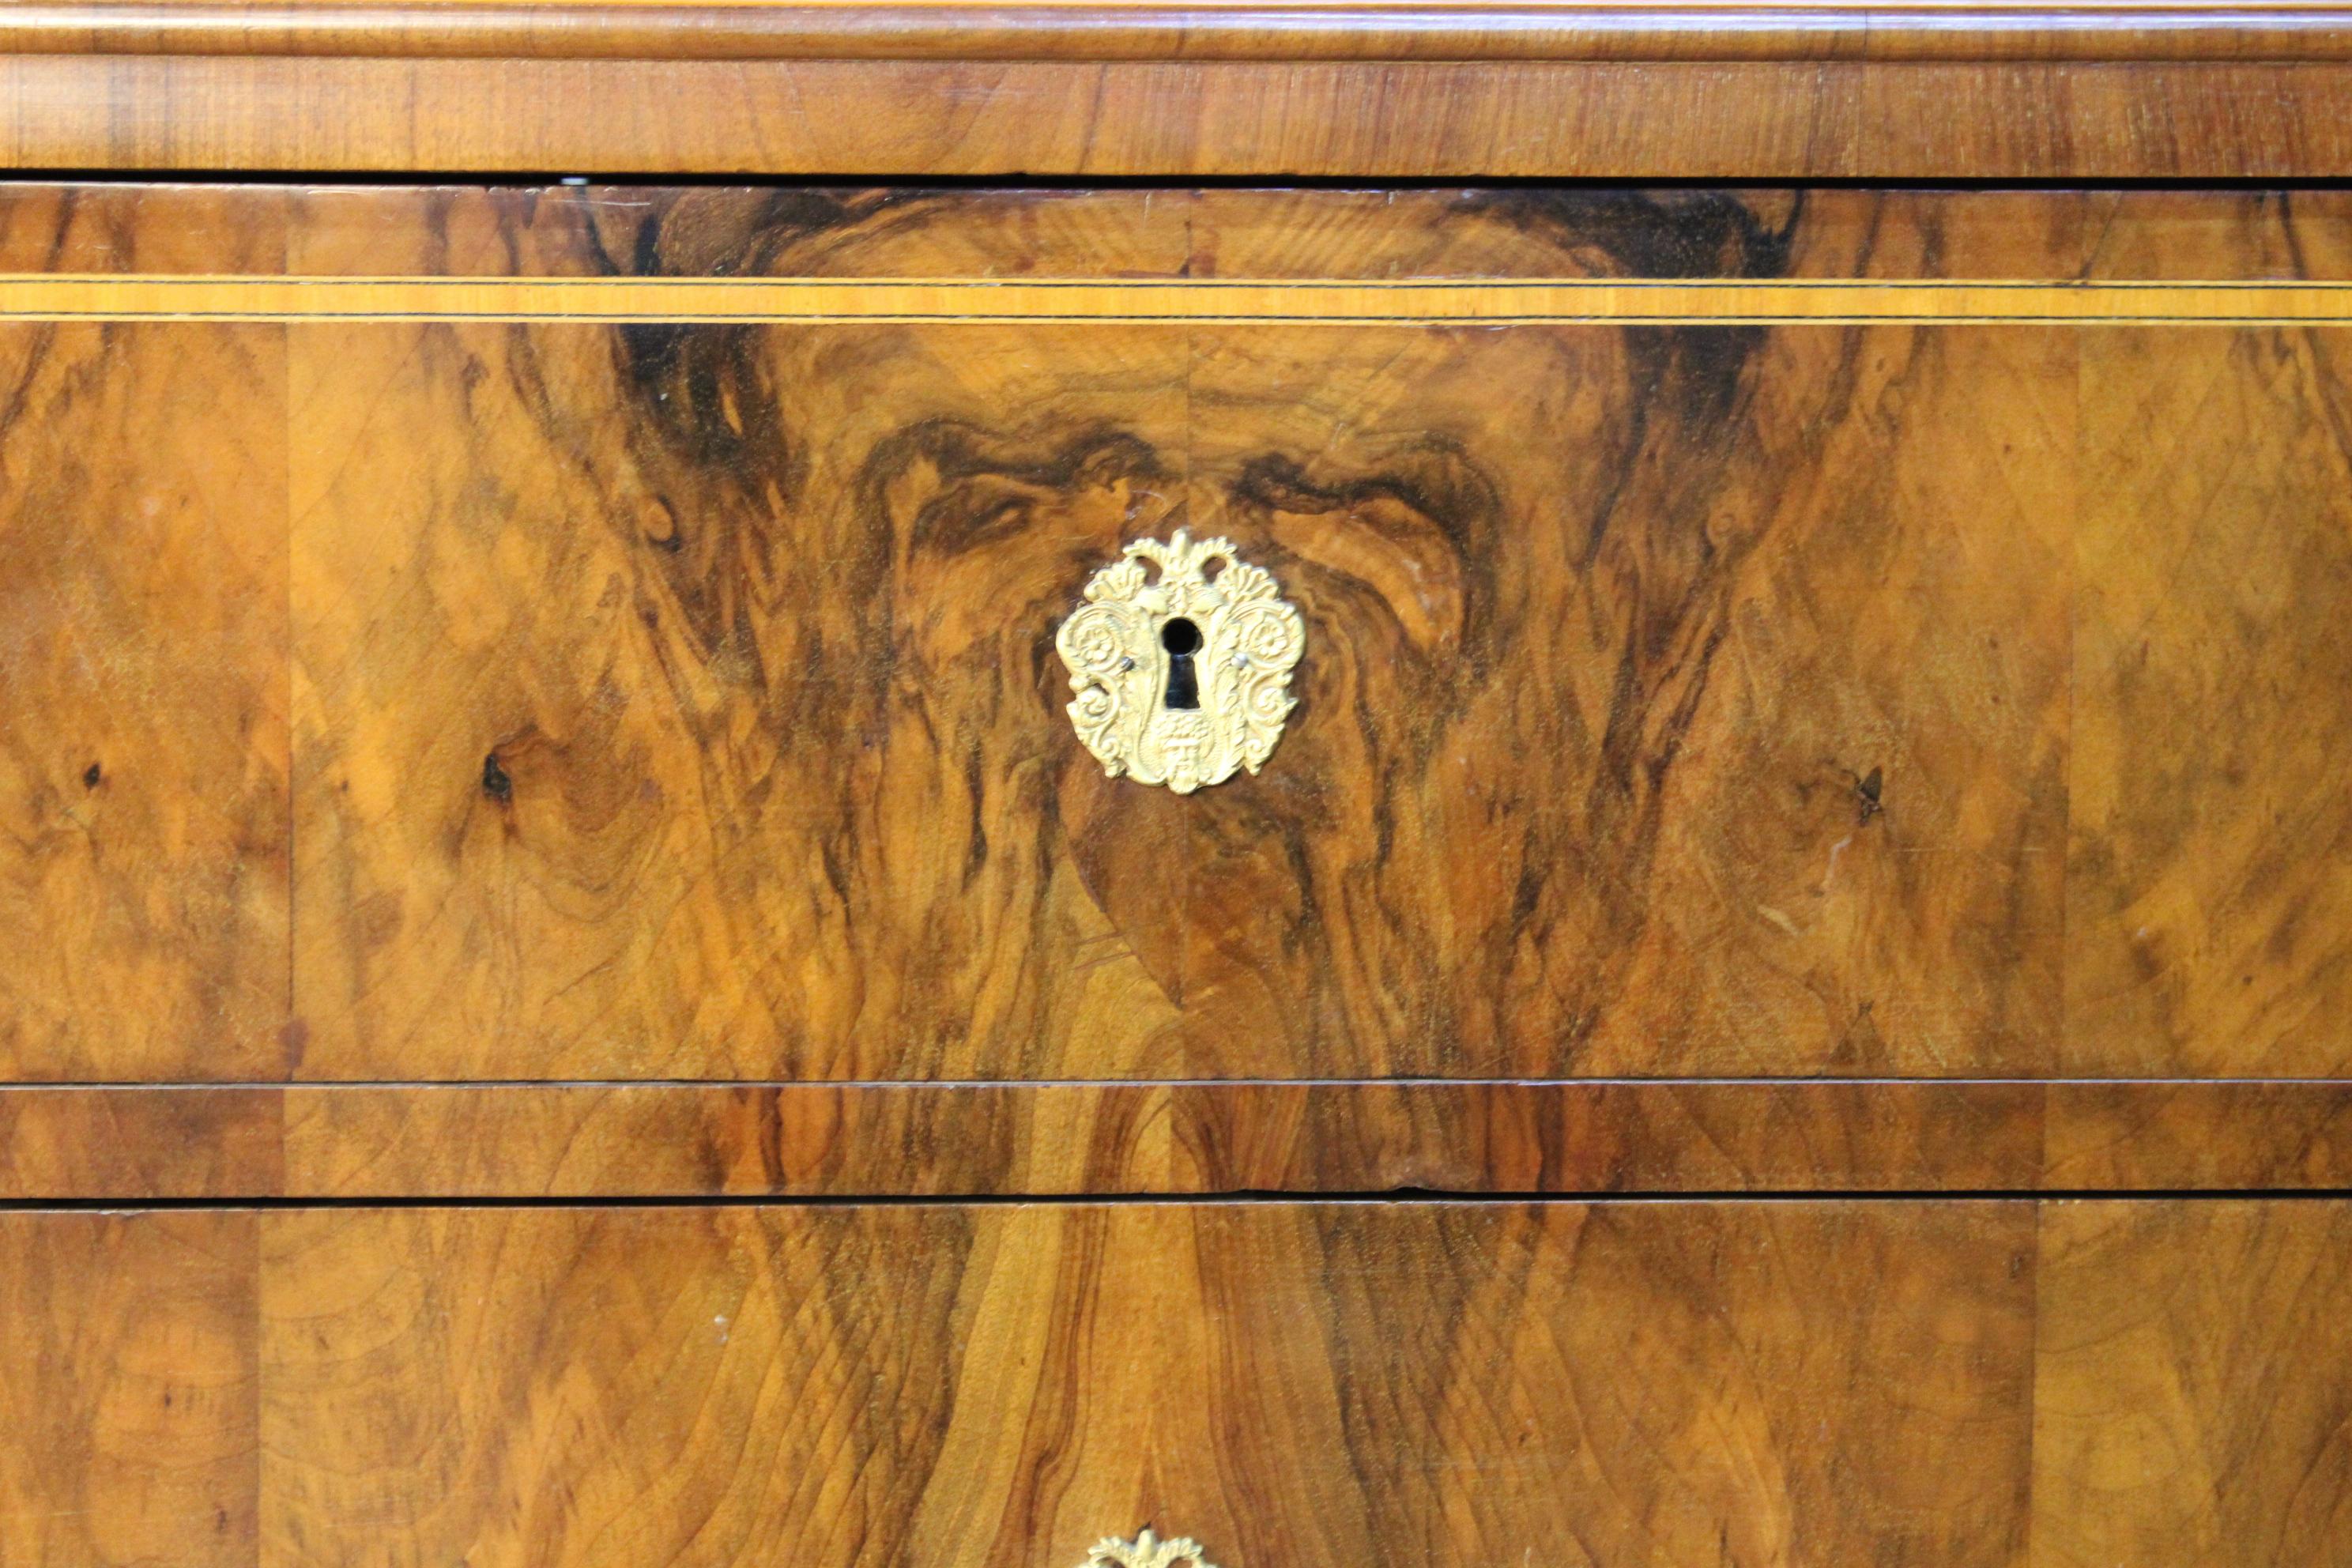 Remarkable Classicism chest of drawers from the late 18th century, the so called Josephinism period - the smooth transition from the Baroque to Biedmeier.
Enriched with great nut wood and burl veneer, this eye catching chest of drawers coms with